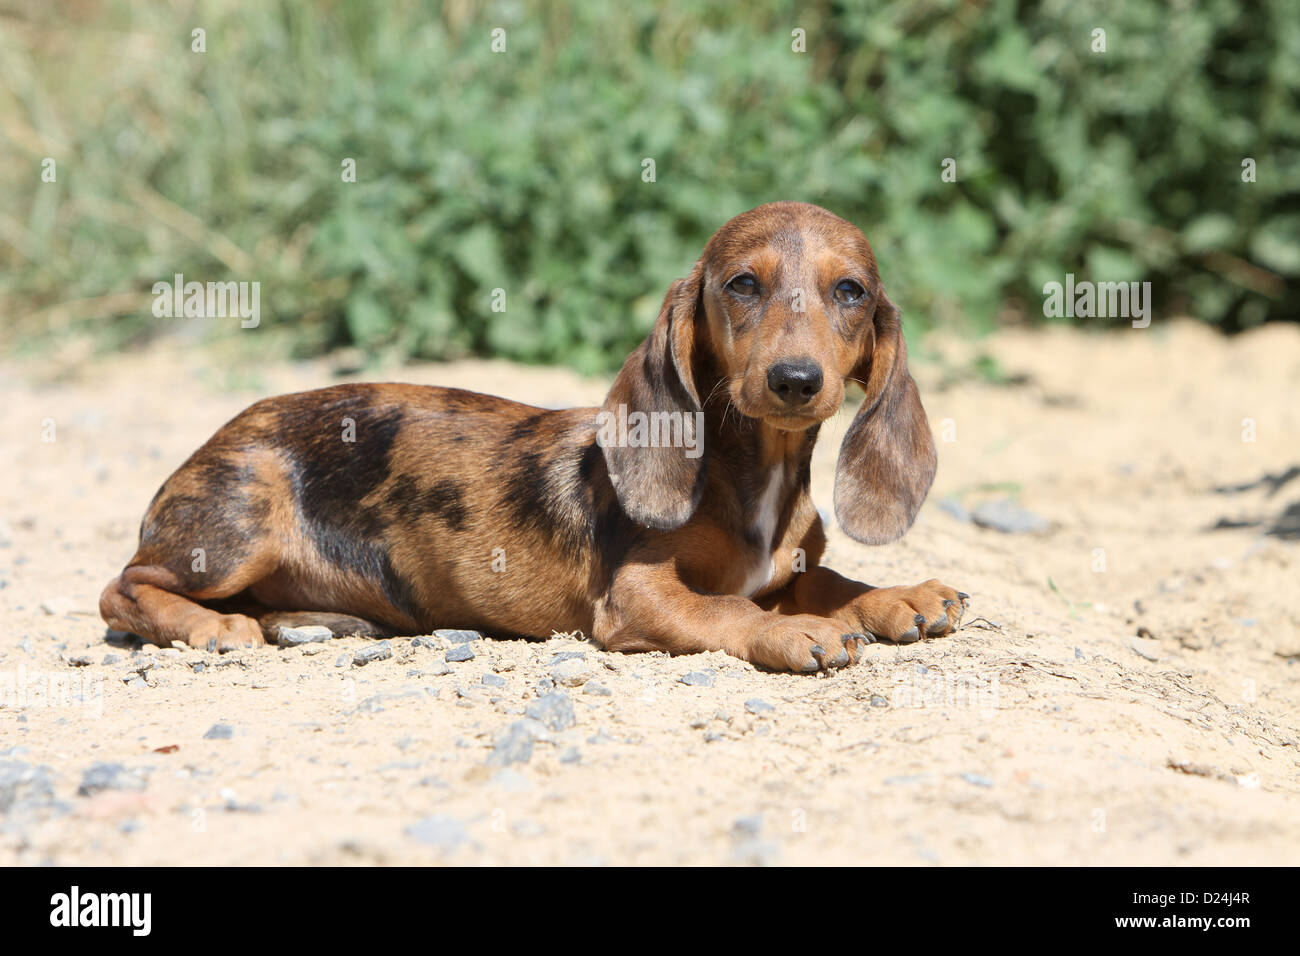 Dog Dachshund /  Dackel / Teckel  shorthaired puppy (Harlequin Merle brown) lying on the ground Stock Photo